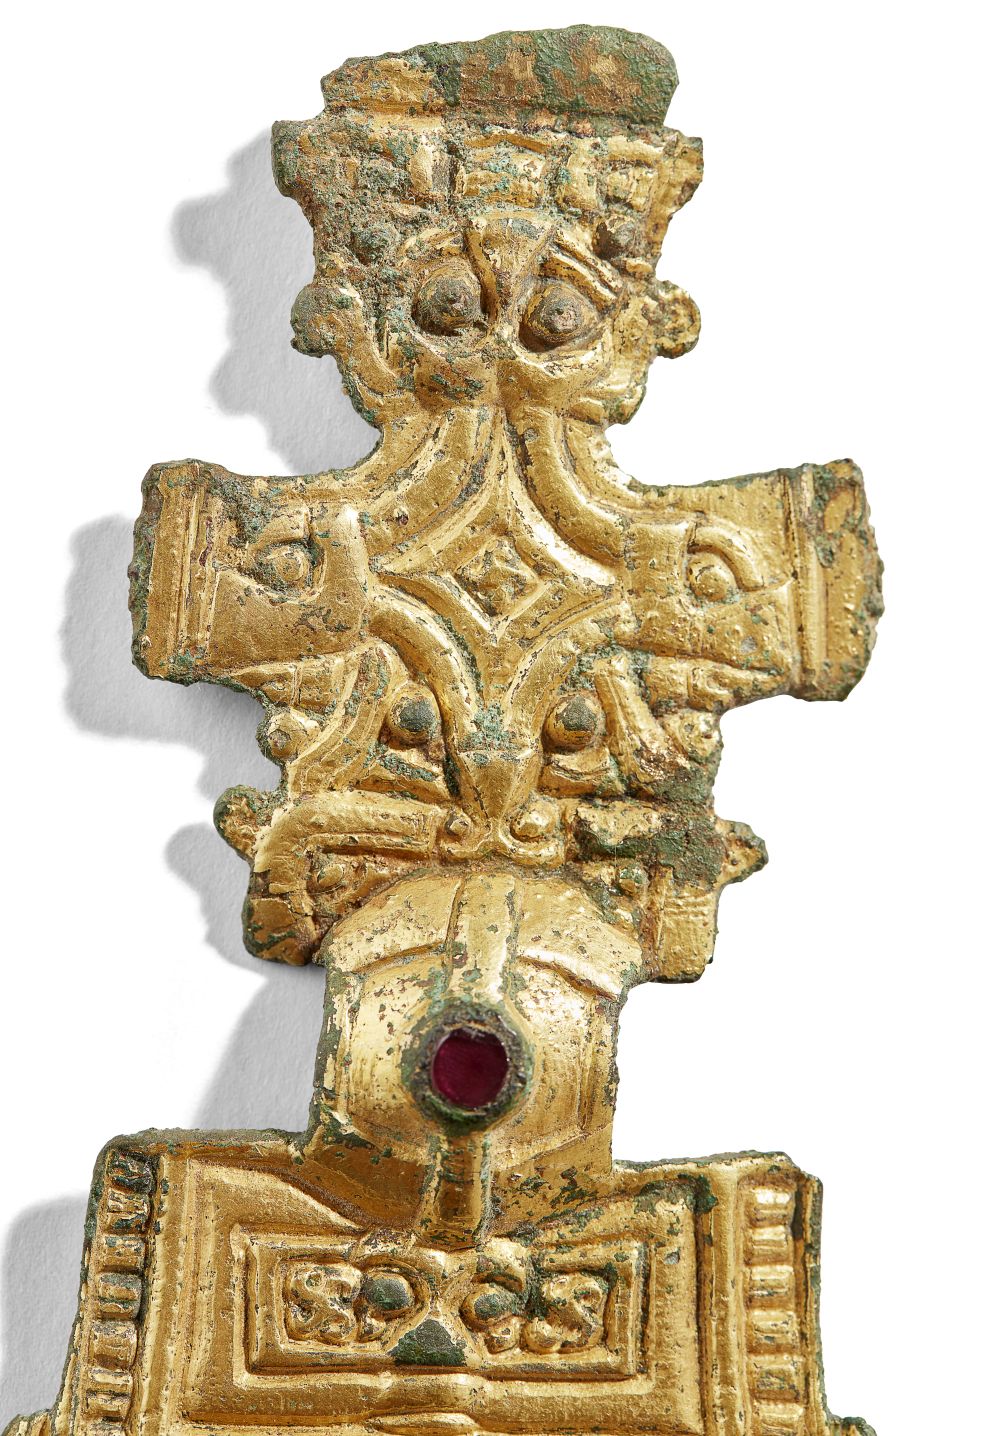 Anglo Saxon Square Headed Brooch